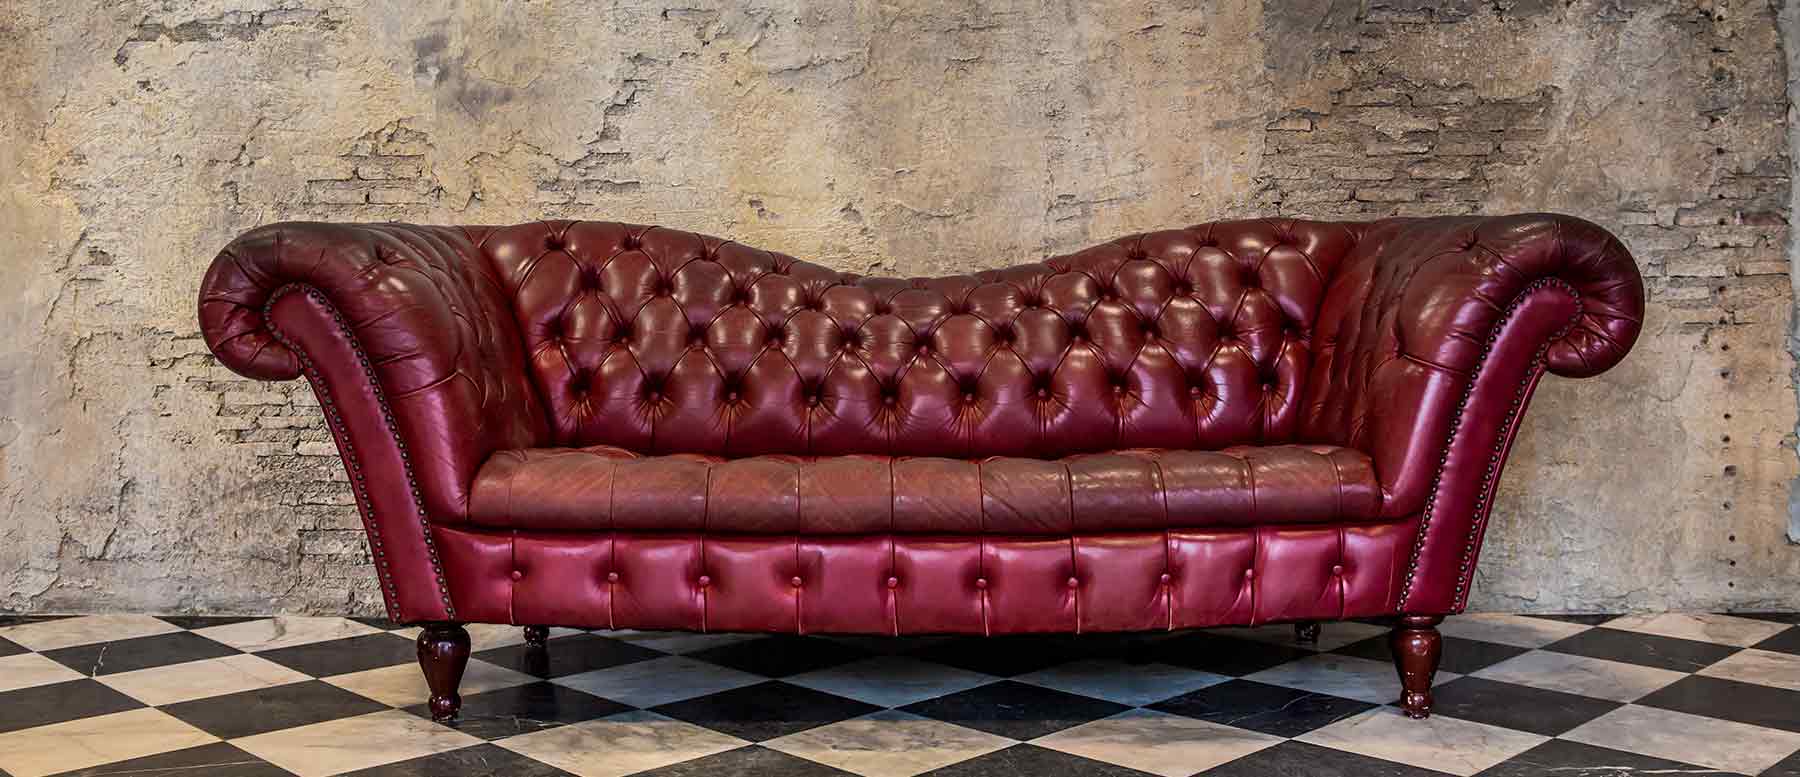 Everything you need to know about luxury sofas